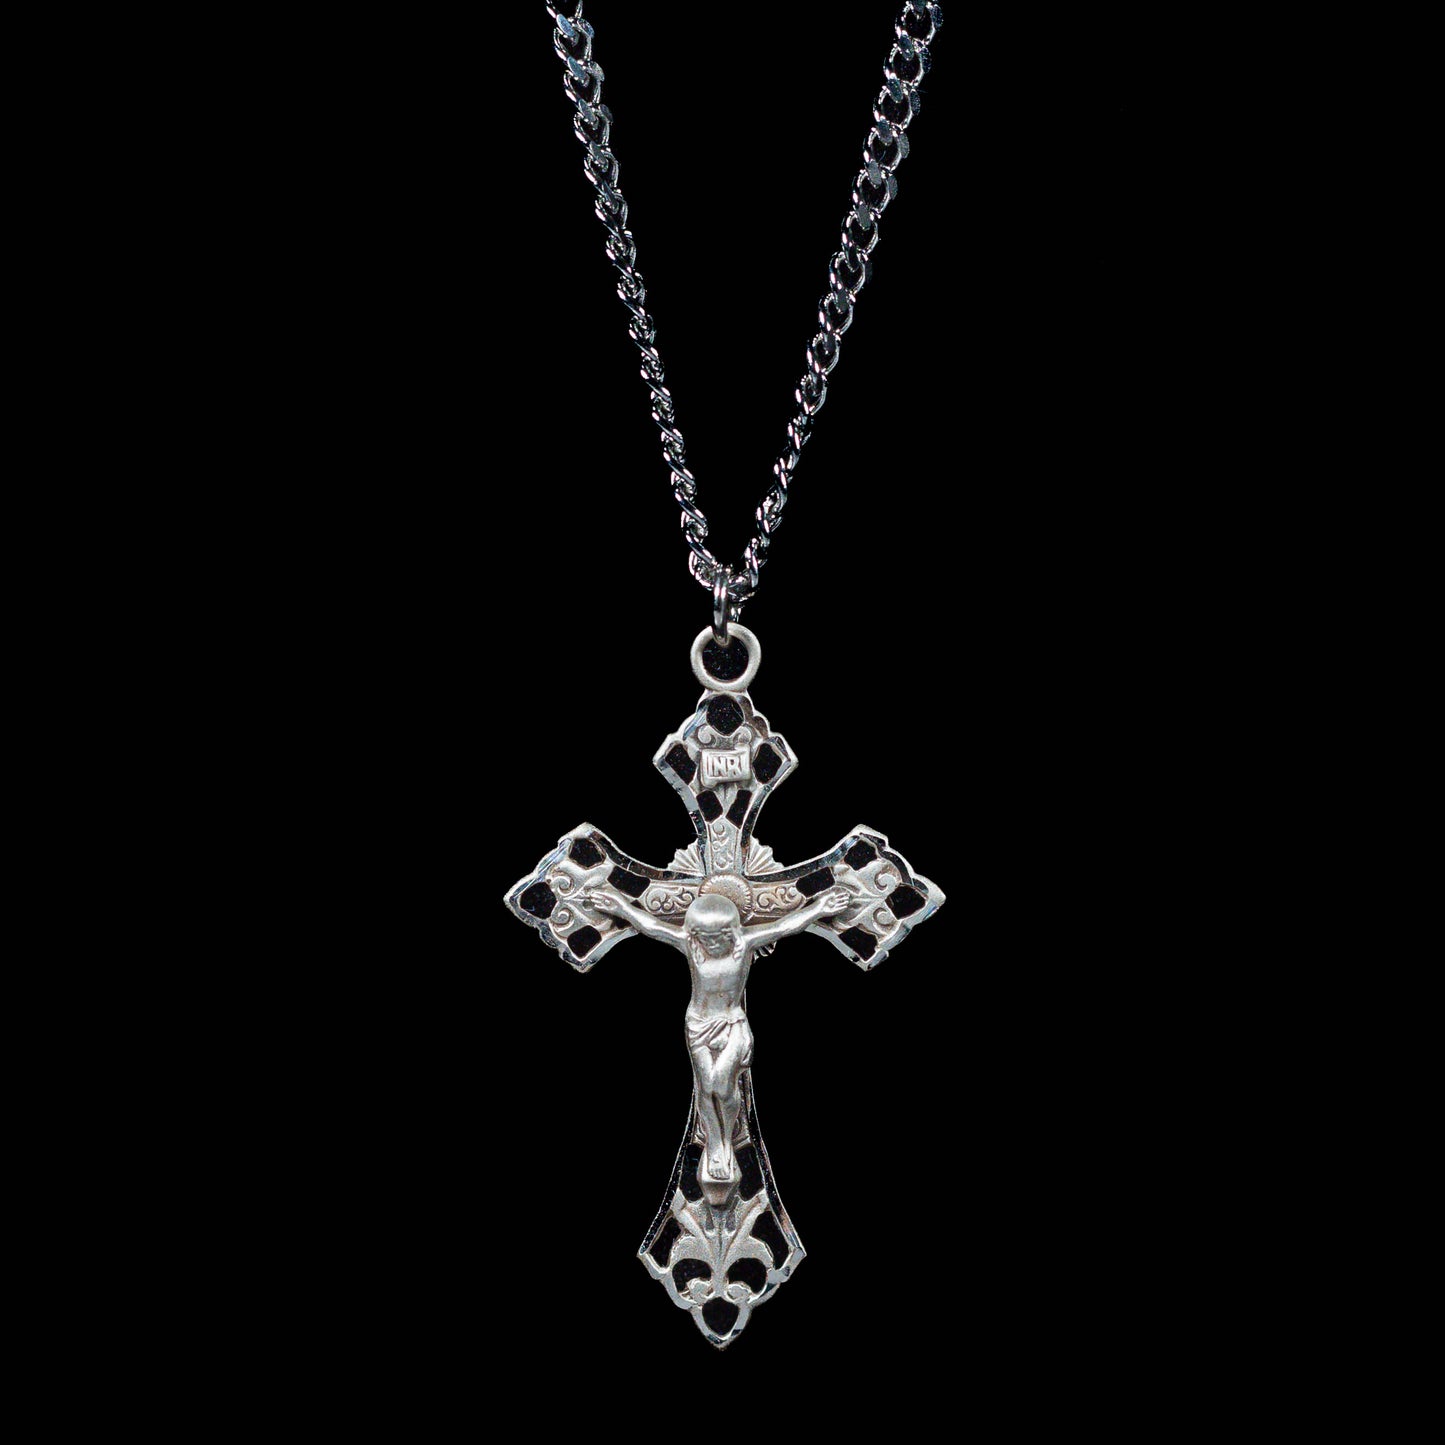 Large Angle-Tipped Crucifix Necklace